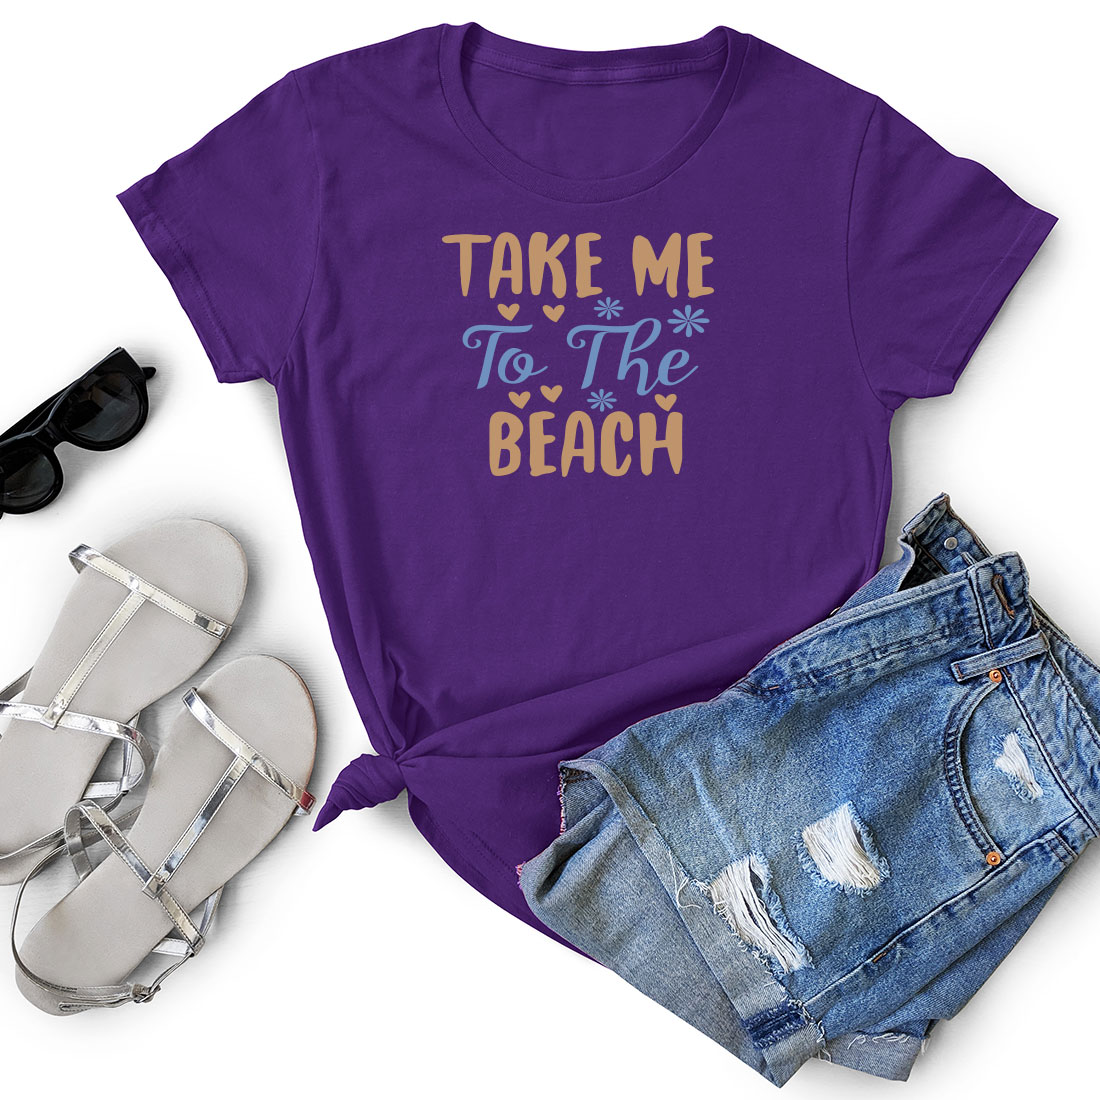 T - shirt that says take me to the beach next to a pair of.